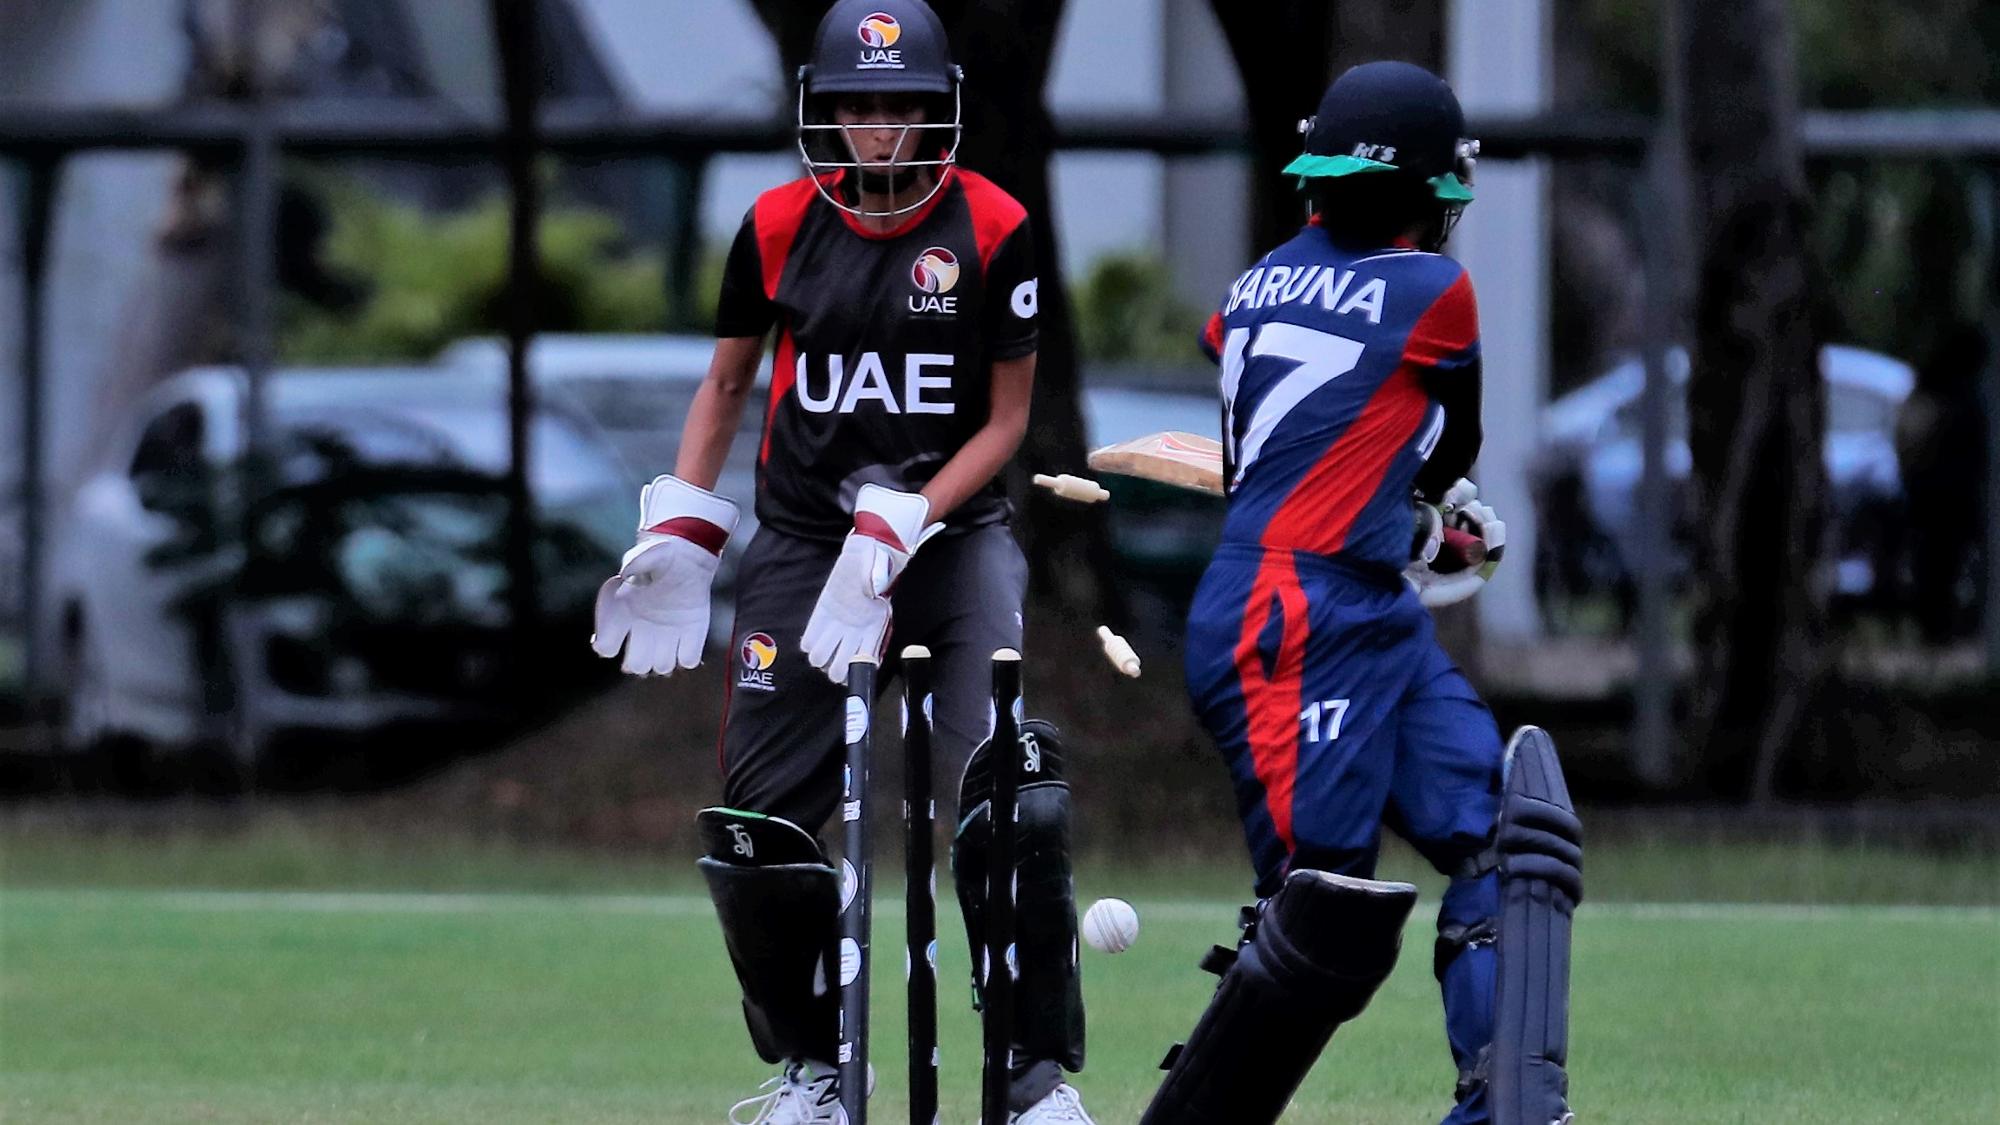 Nepal Defeated by UAE Fails to Qualify for T20 World Cup